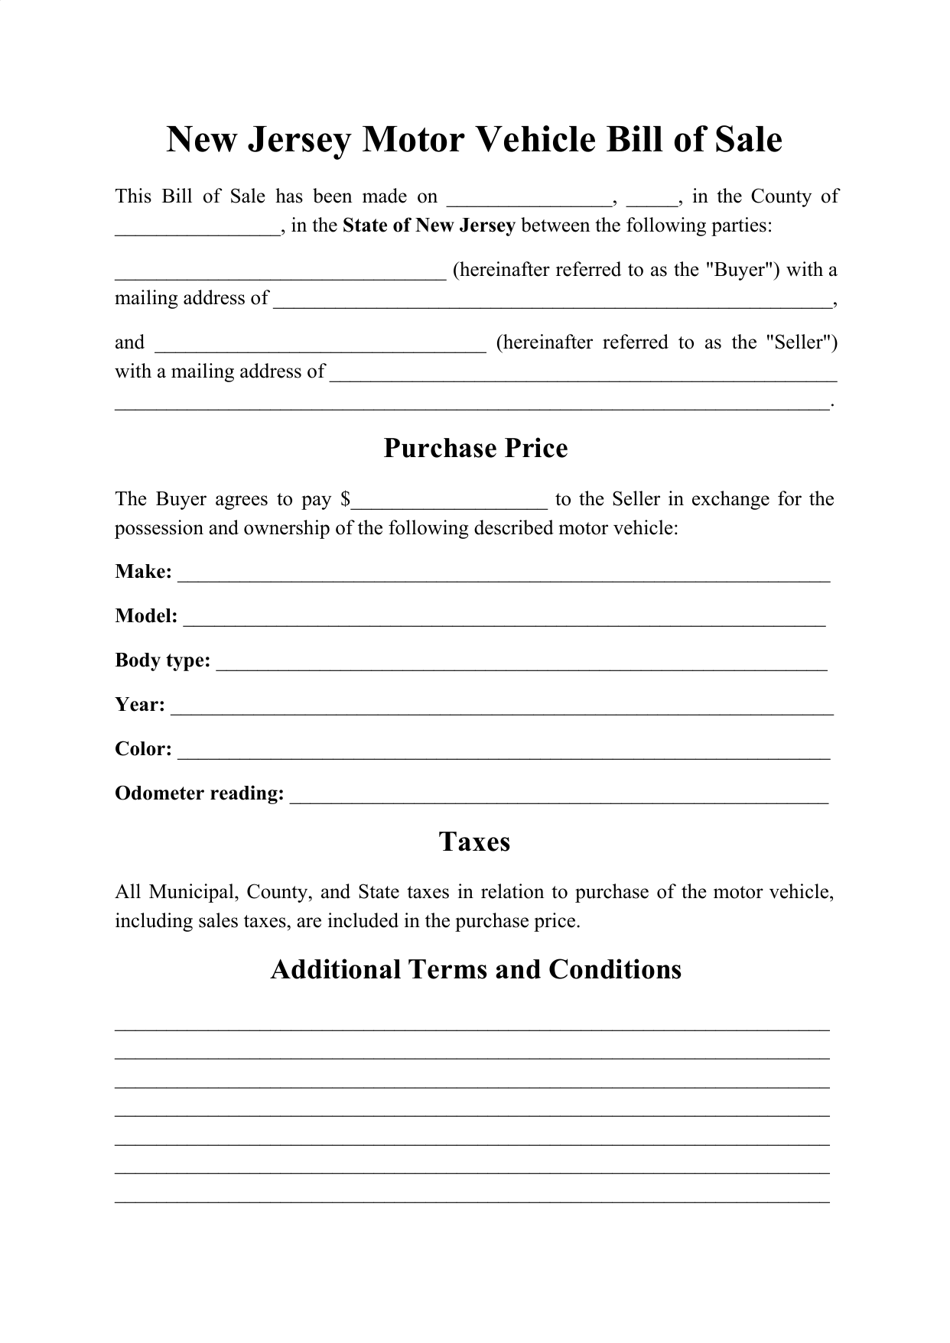 Motor Vehicle Bill of Sale Form - New Jersey, Page 1